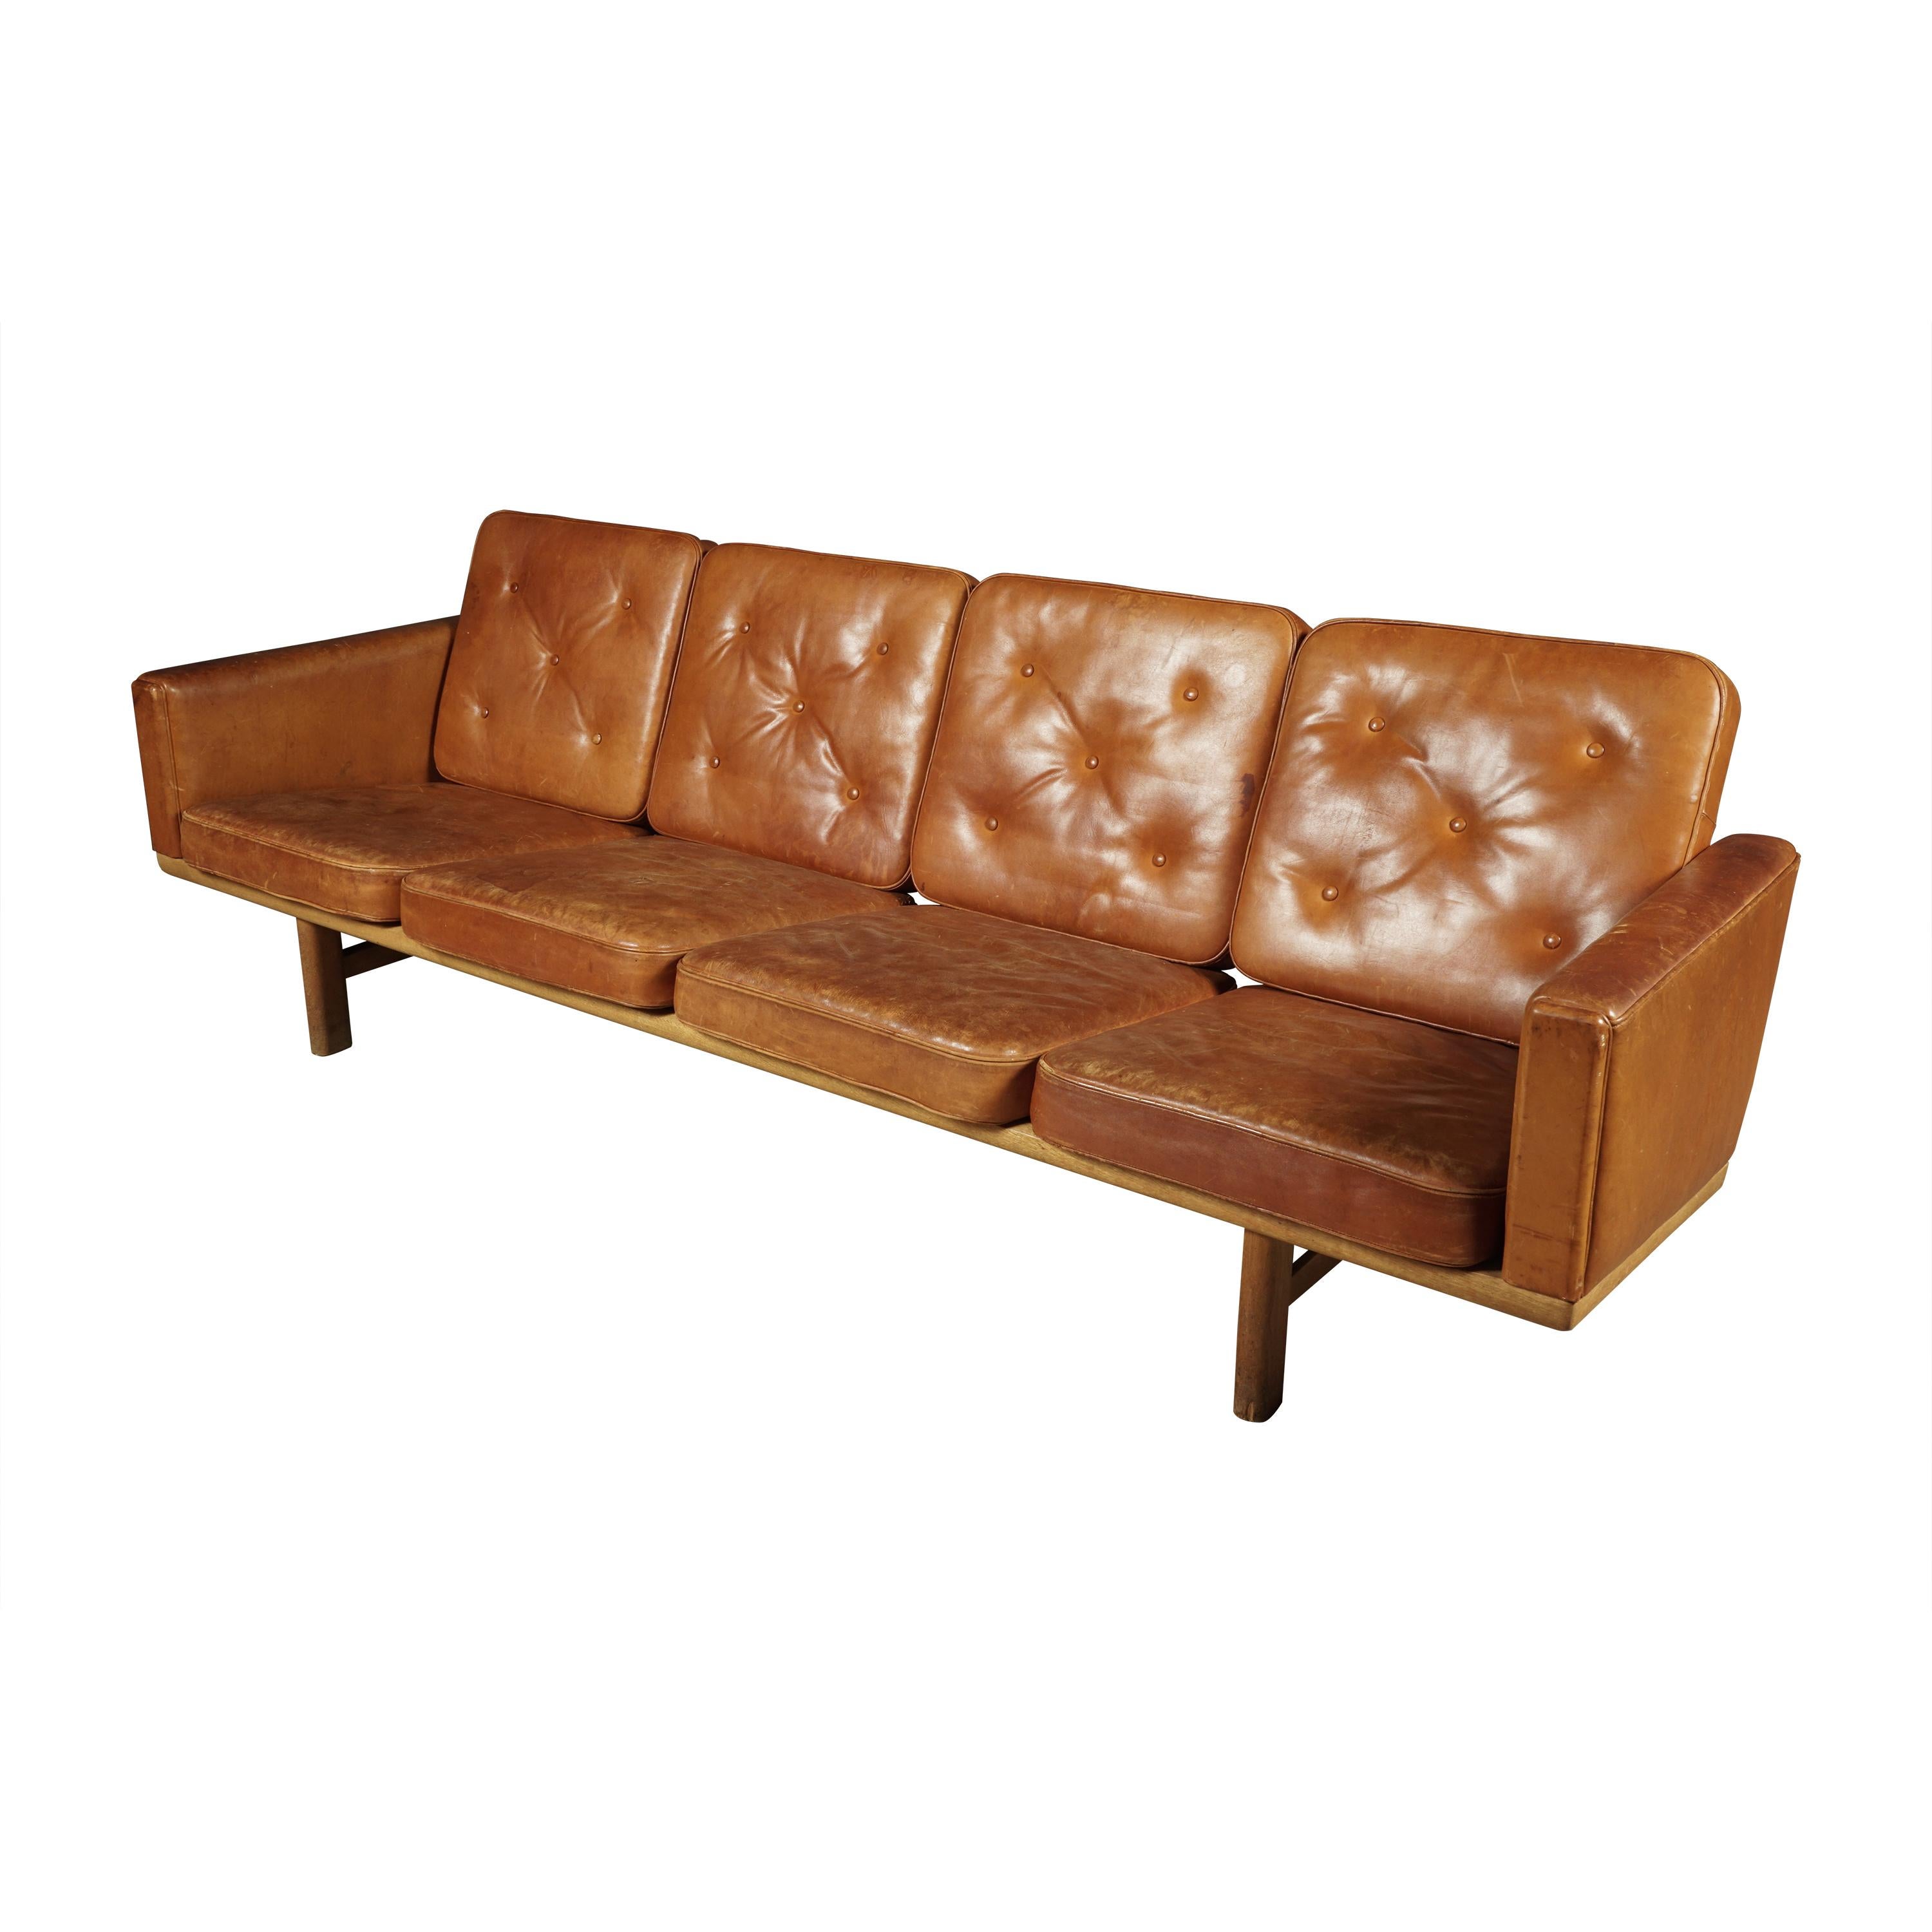 Vintage Leather Sofa Designed by Hans Wegner, Model 236, Denmark, 1950s at  1stDibs | retro leather couch, vintage leather couches, leather sofa vintage